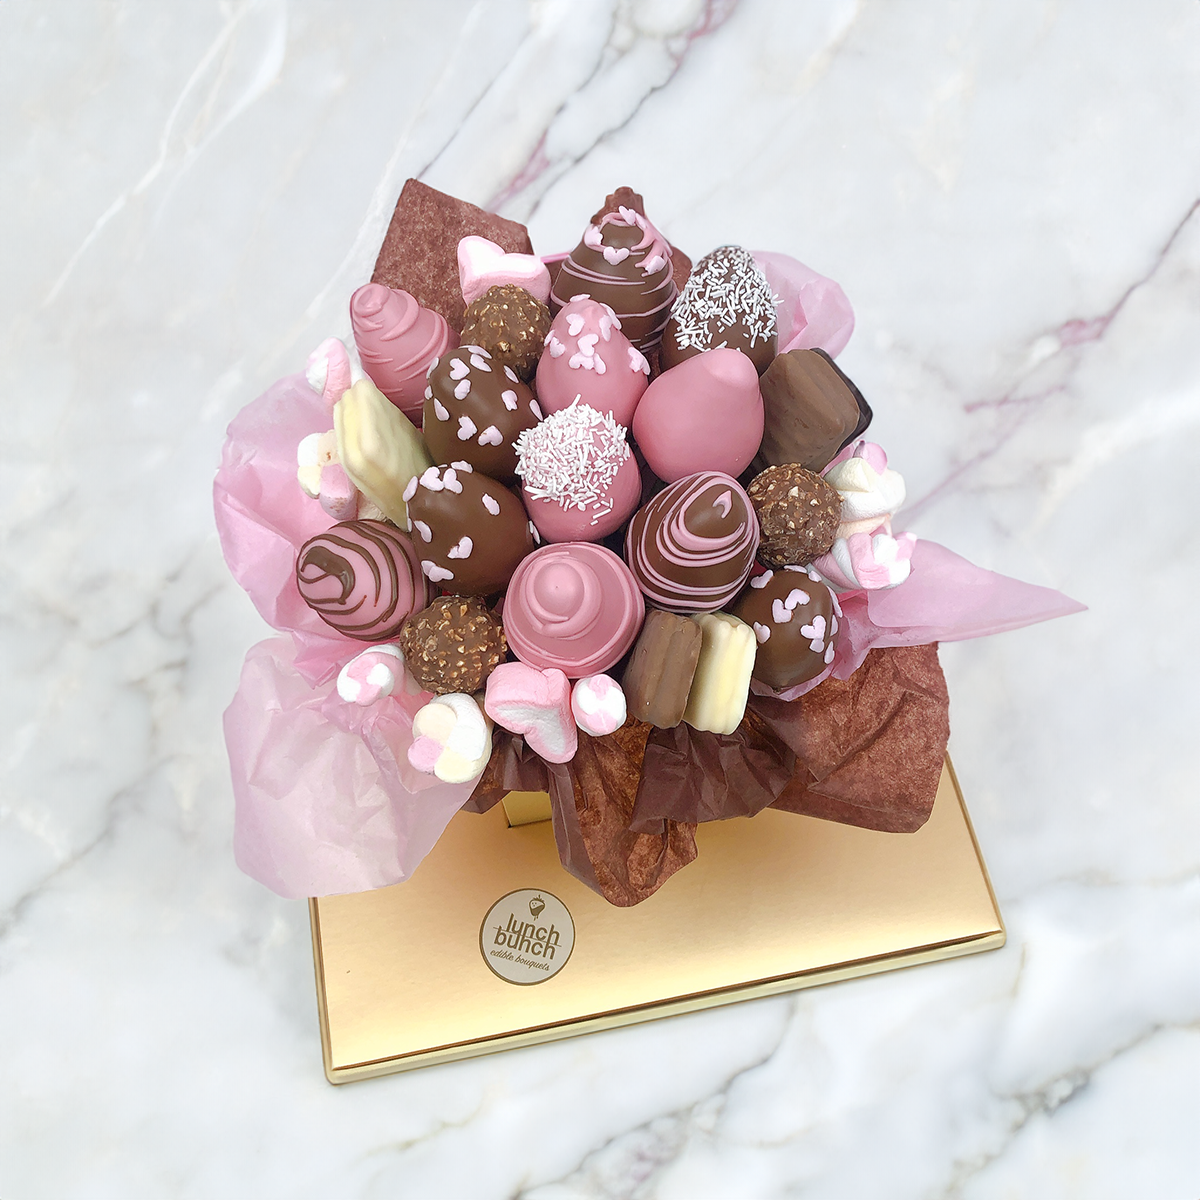 Surprise your loved ones with our Pink Birthday Chocolate Bouquet. Handcrafted to perfection, it's the ideal gift for birthdays,